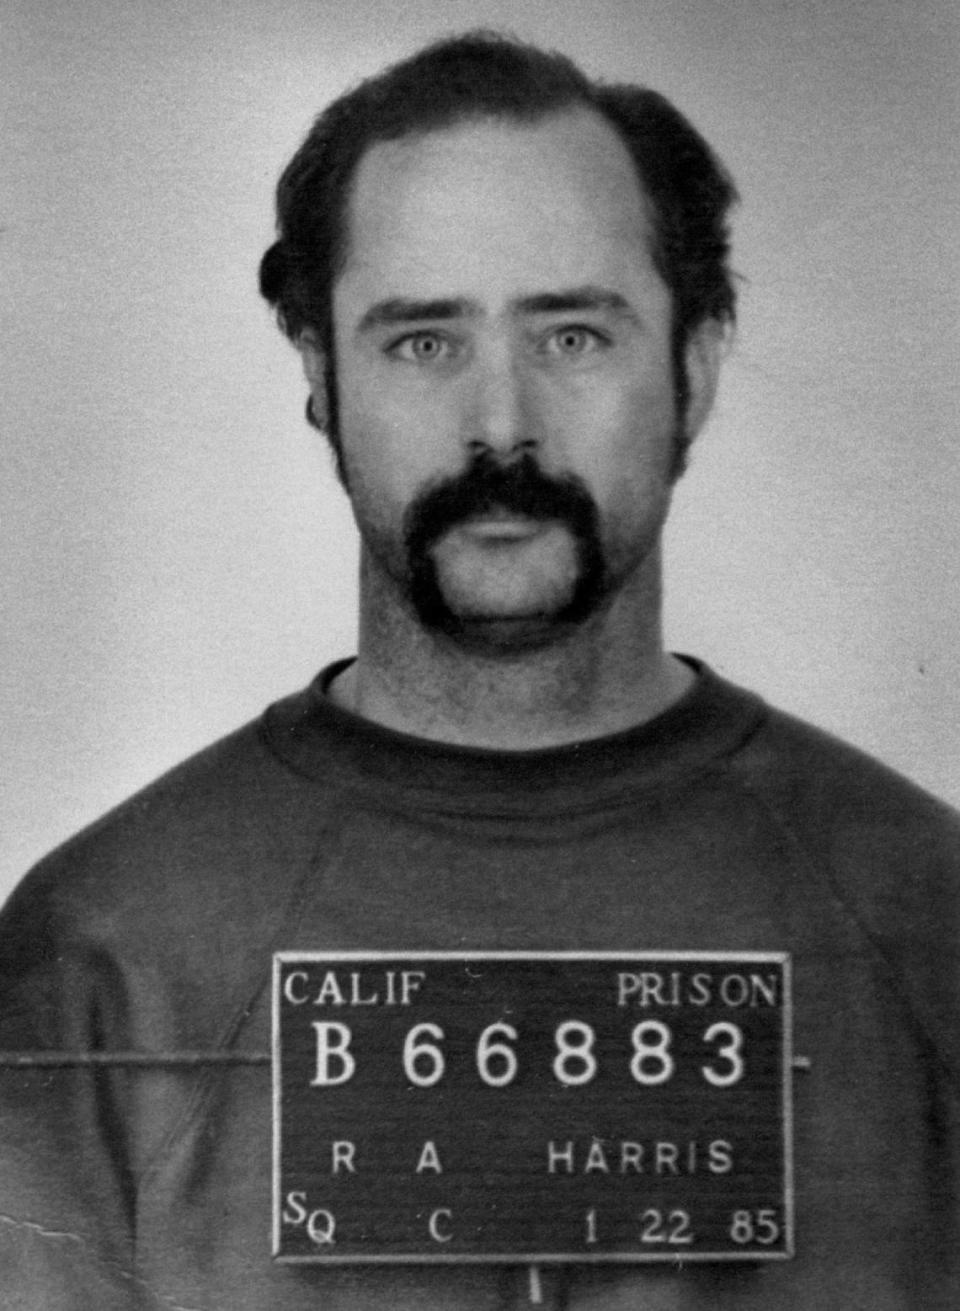 1985 mug shot of Richard Alton Harris, convicted of the 1978 killing of two San Diego teens, John Mayeski and Michael Baker (both 16). He was executed in at San Quentin State Prison in 1992.